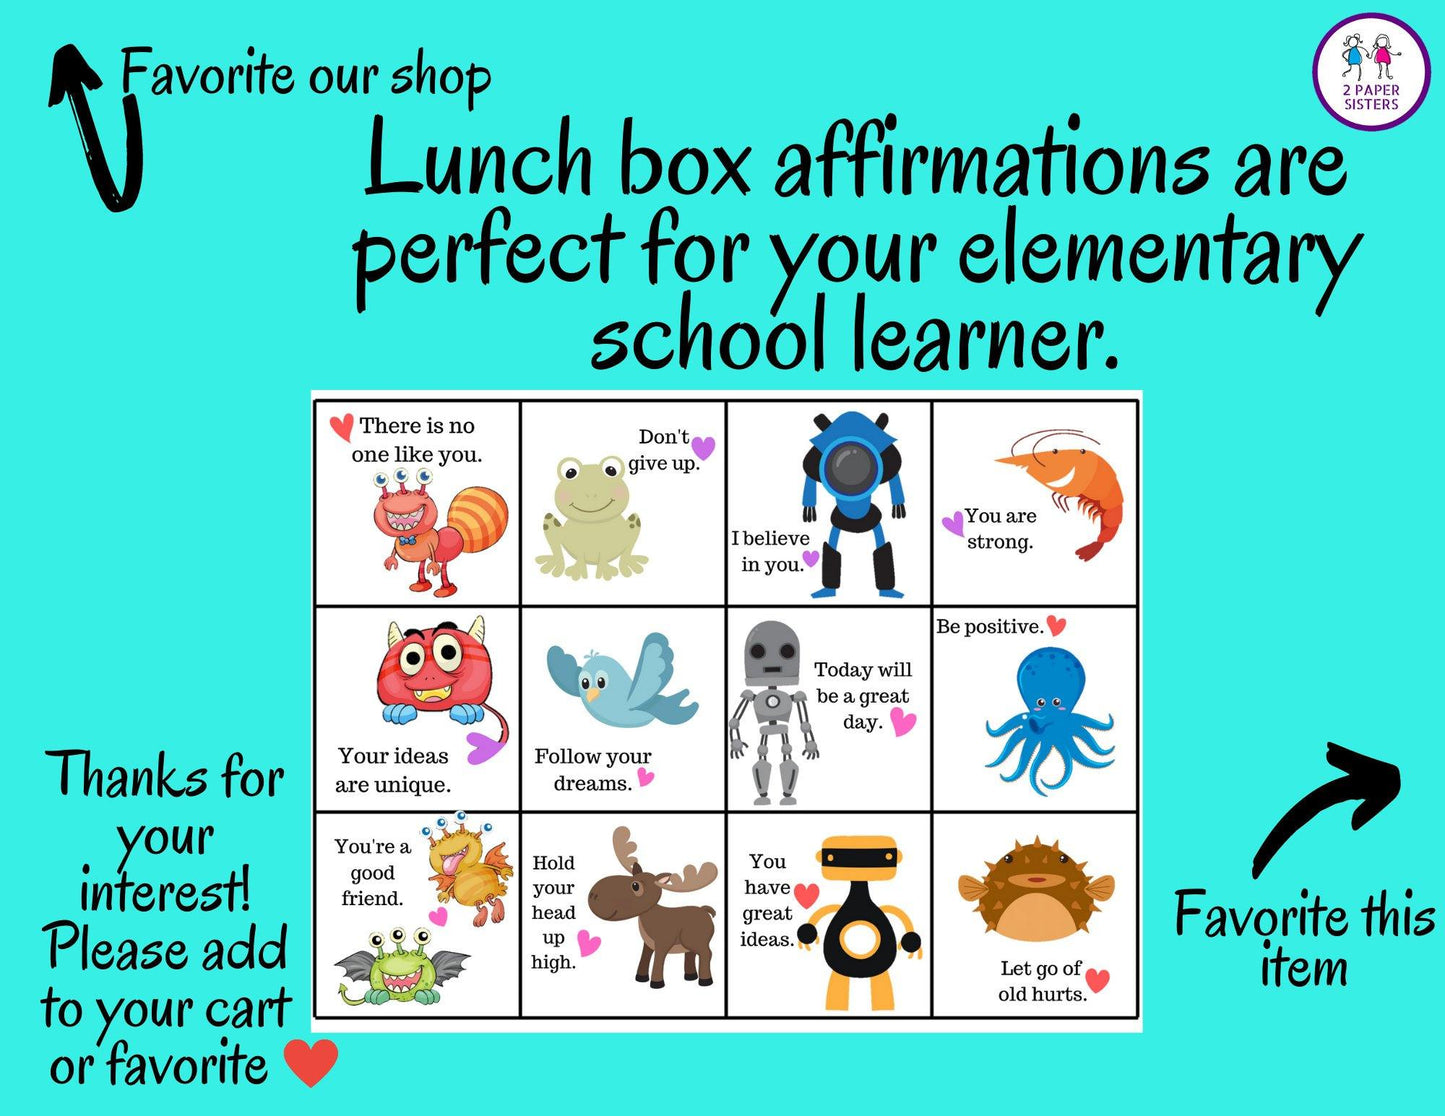 Elementary Lunchbox Notes- Digital Download - 2 Paper Sisters